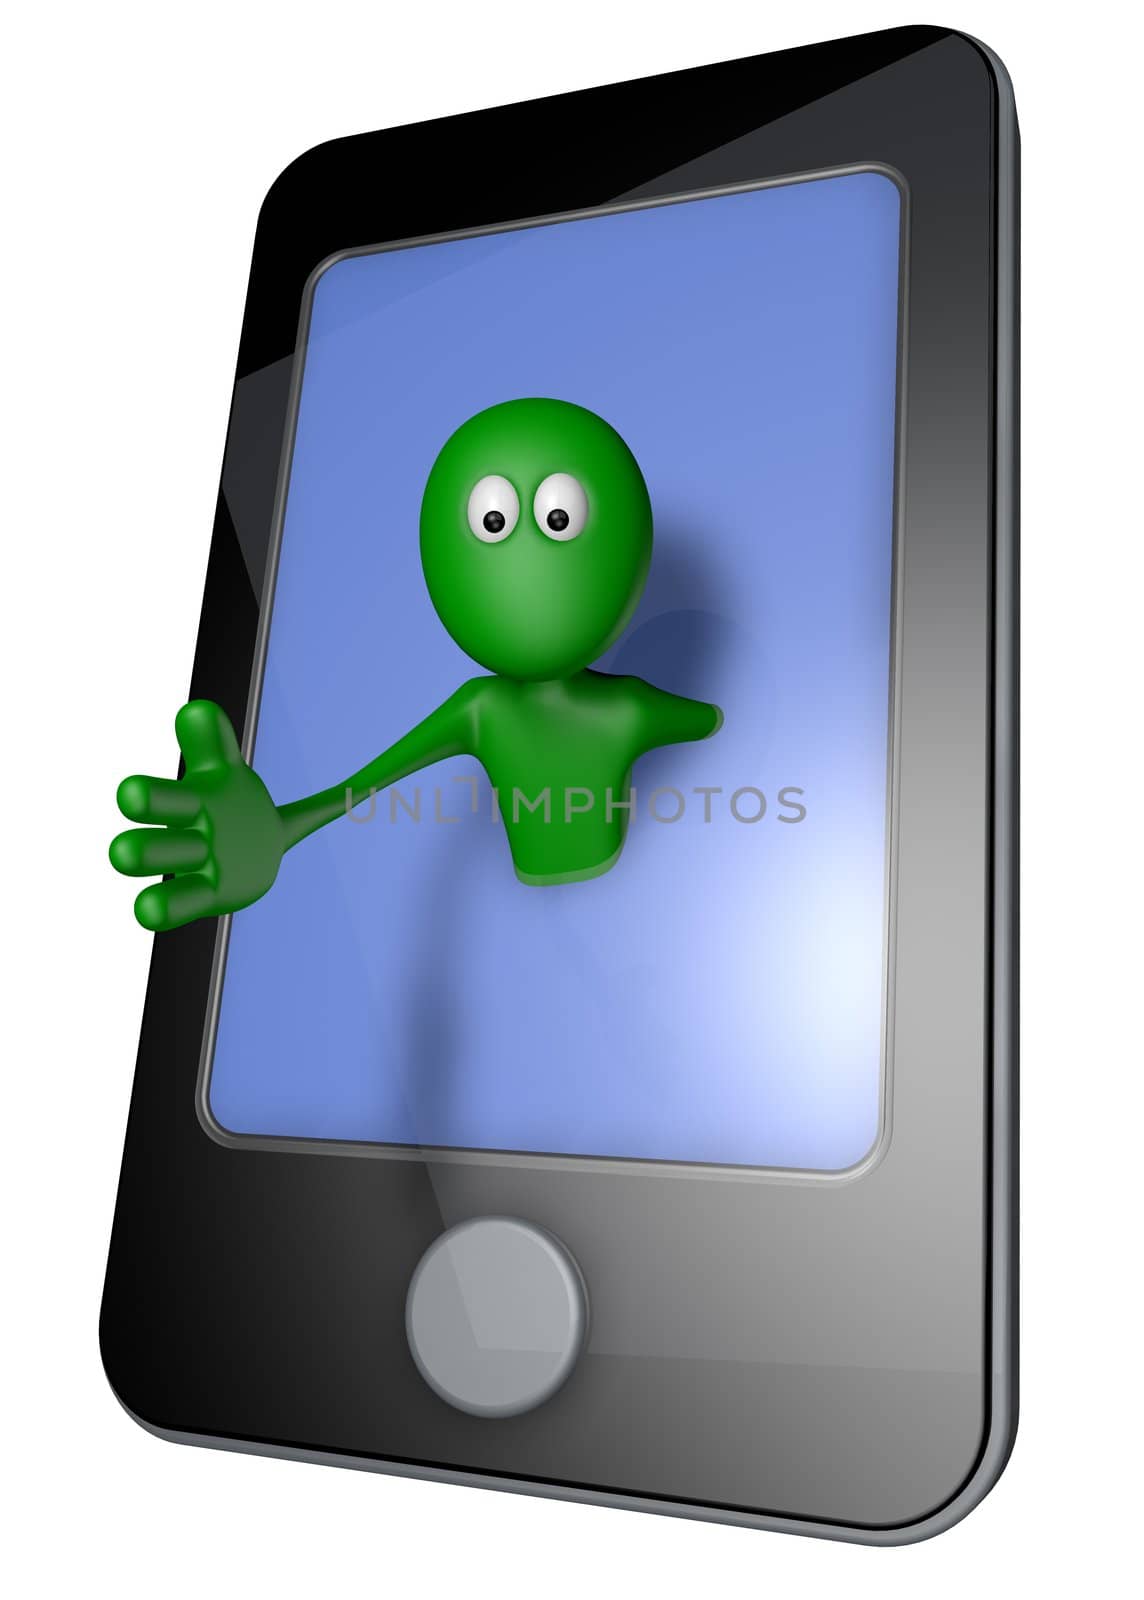 green guy and smartphone - 3d illustration